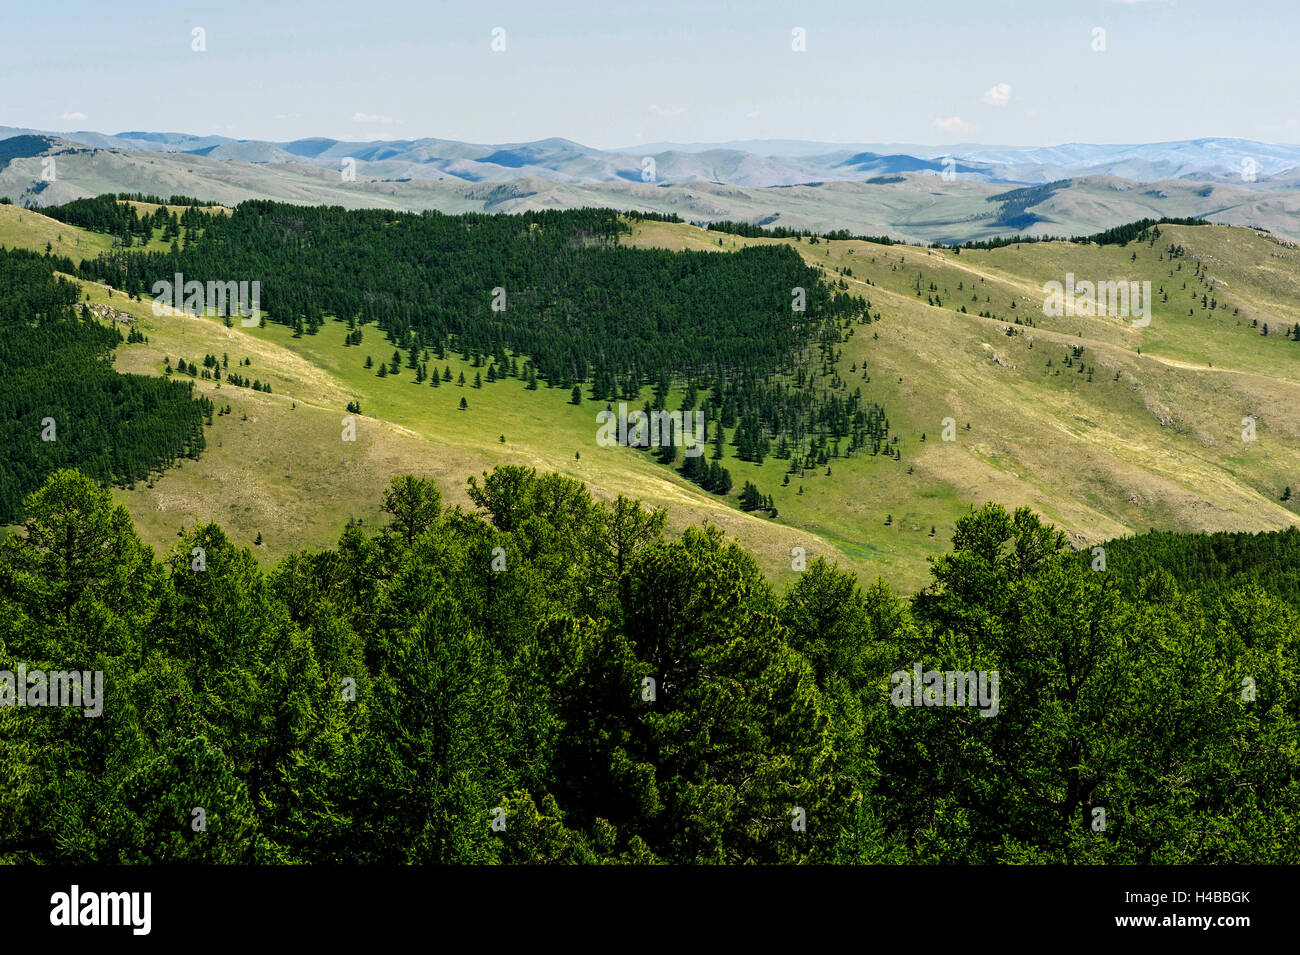 Steppe landscape with receding forest due to climate change, Uvurkhangai aimag, Mongolia Stock Photo